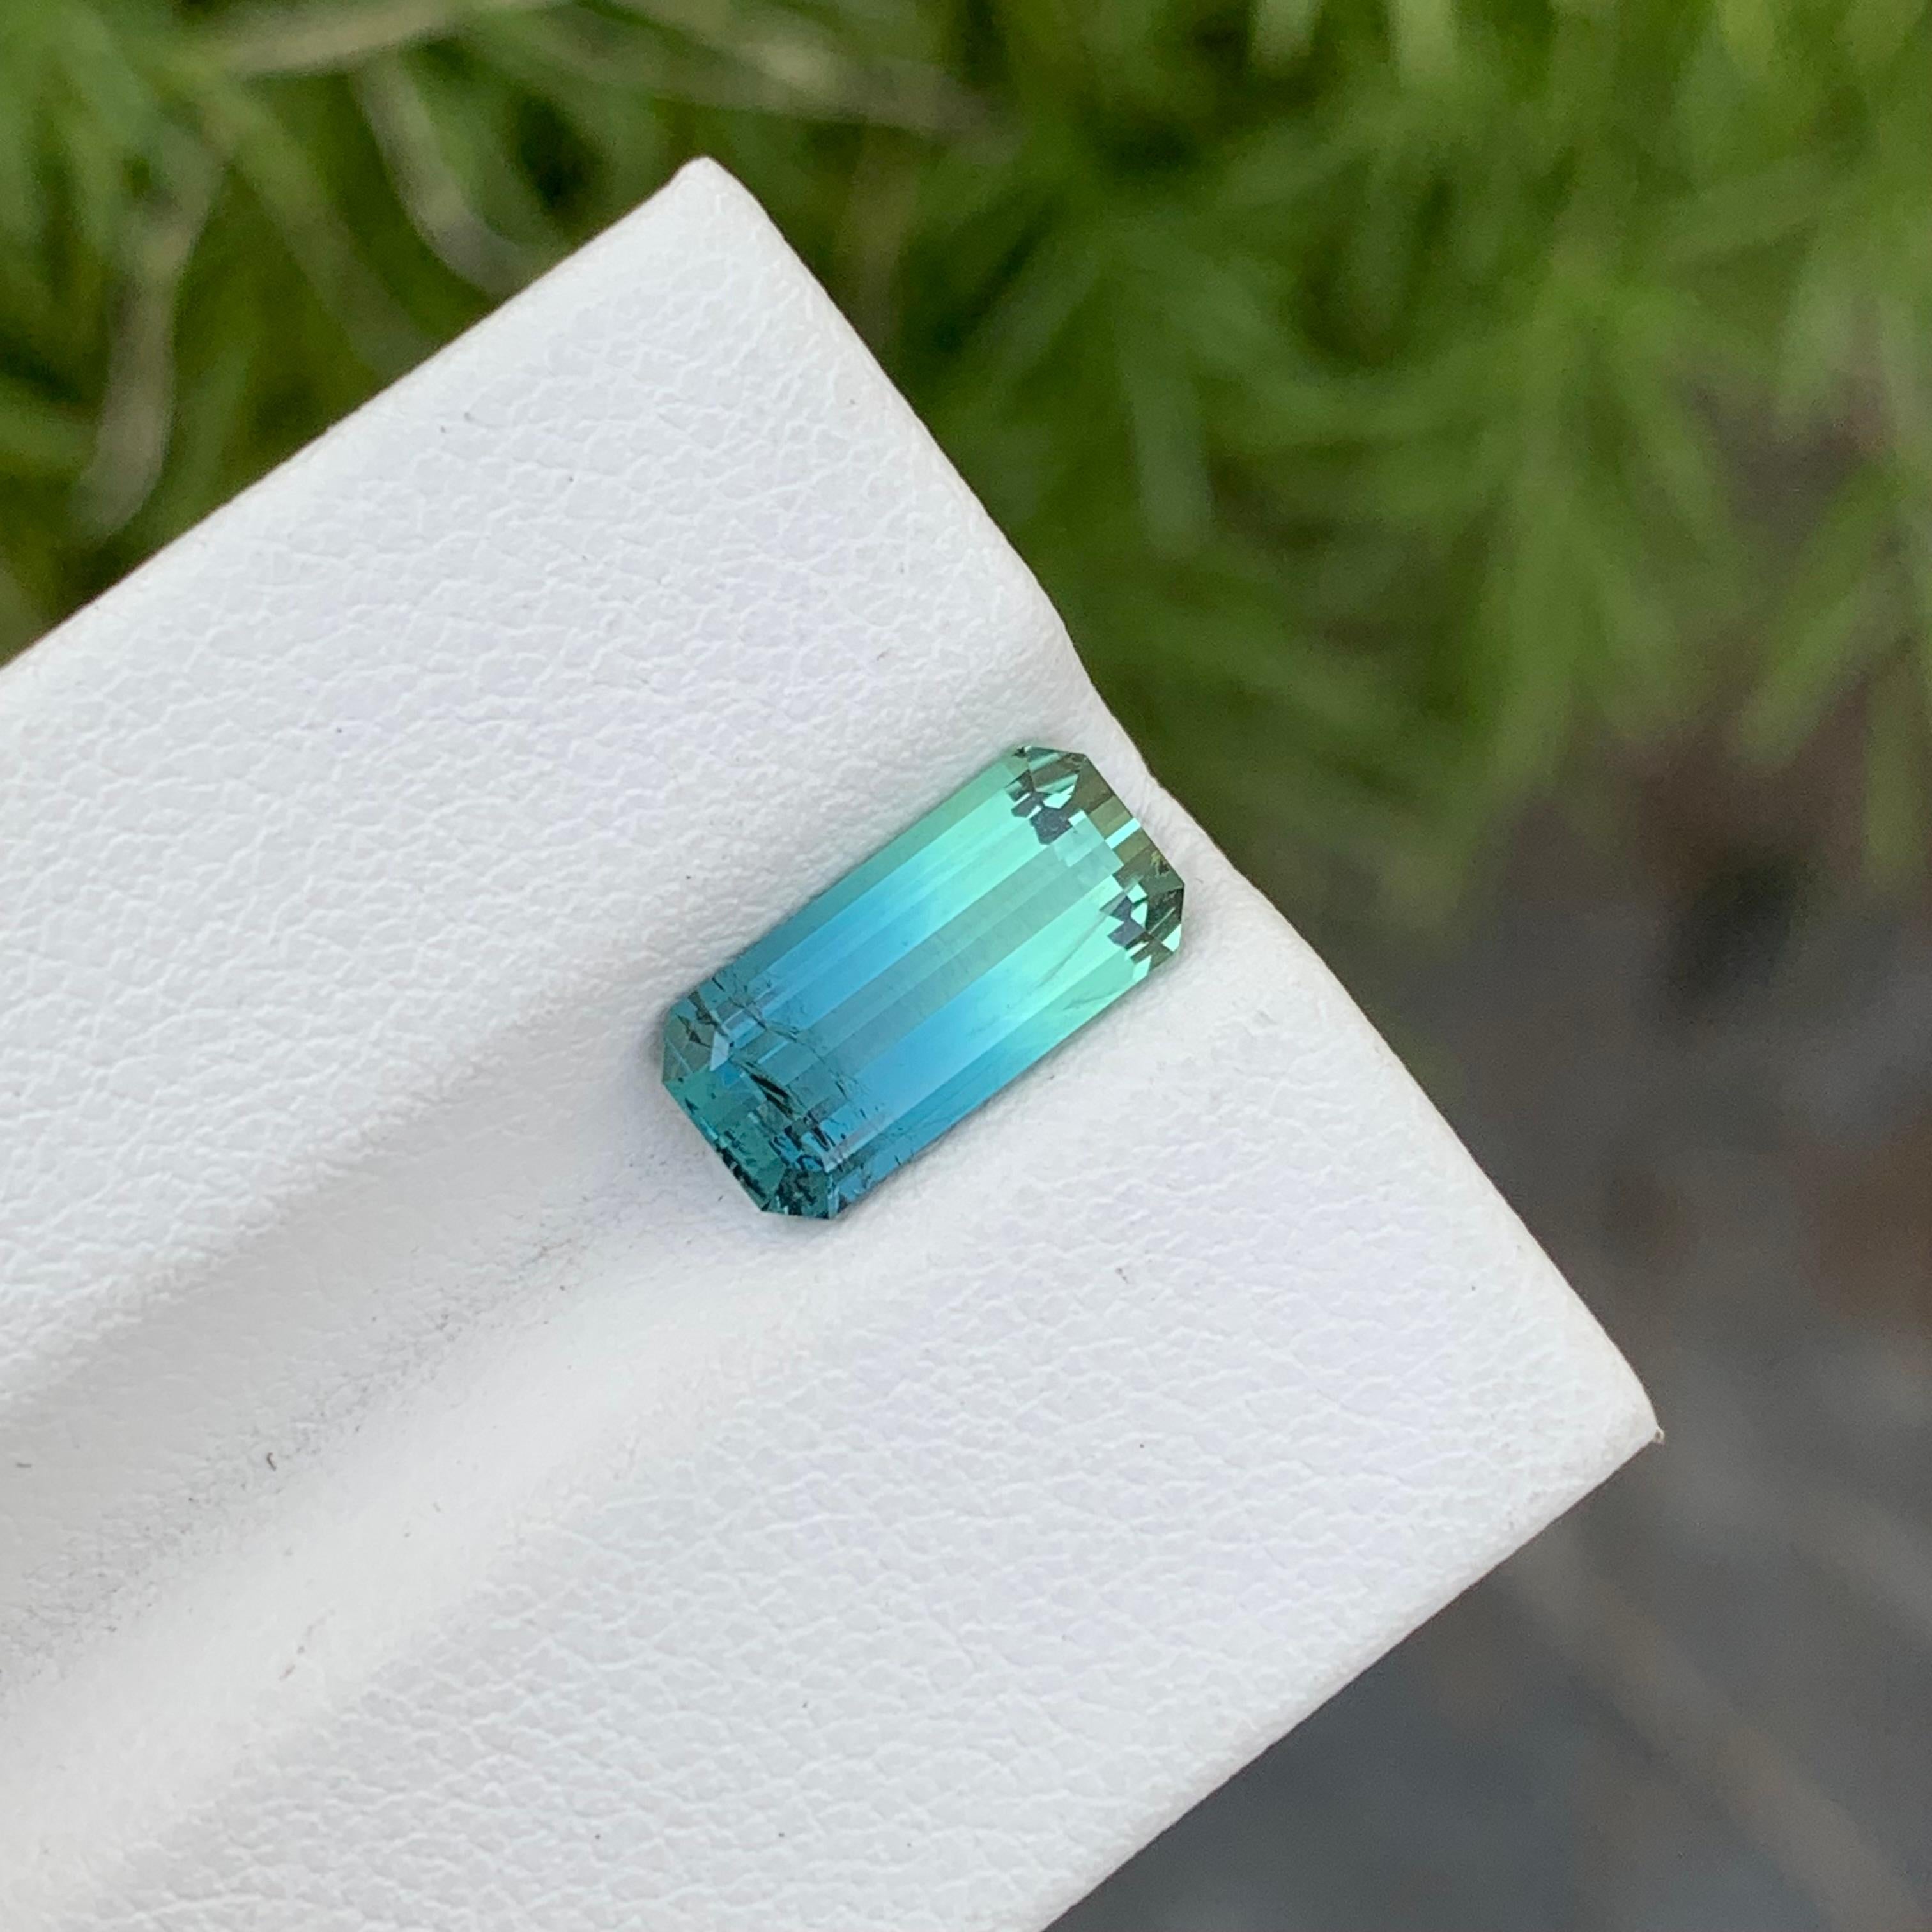 Loose Bi Colour Tourmaline
Weight: 2.25 Carats
Dimension: 11.5 x 5.6 x 3.8 Mm
Colour: Mint And Aqua Blue 
Origin: Afghanistan
Certificate: On Demand
Treatment: Non

Tourmaline is a captivating gemstone known for its remarkable variety of colors,